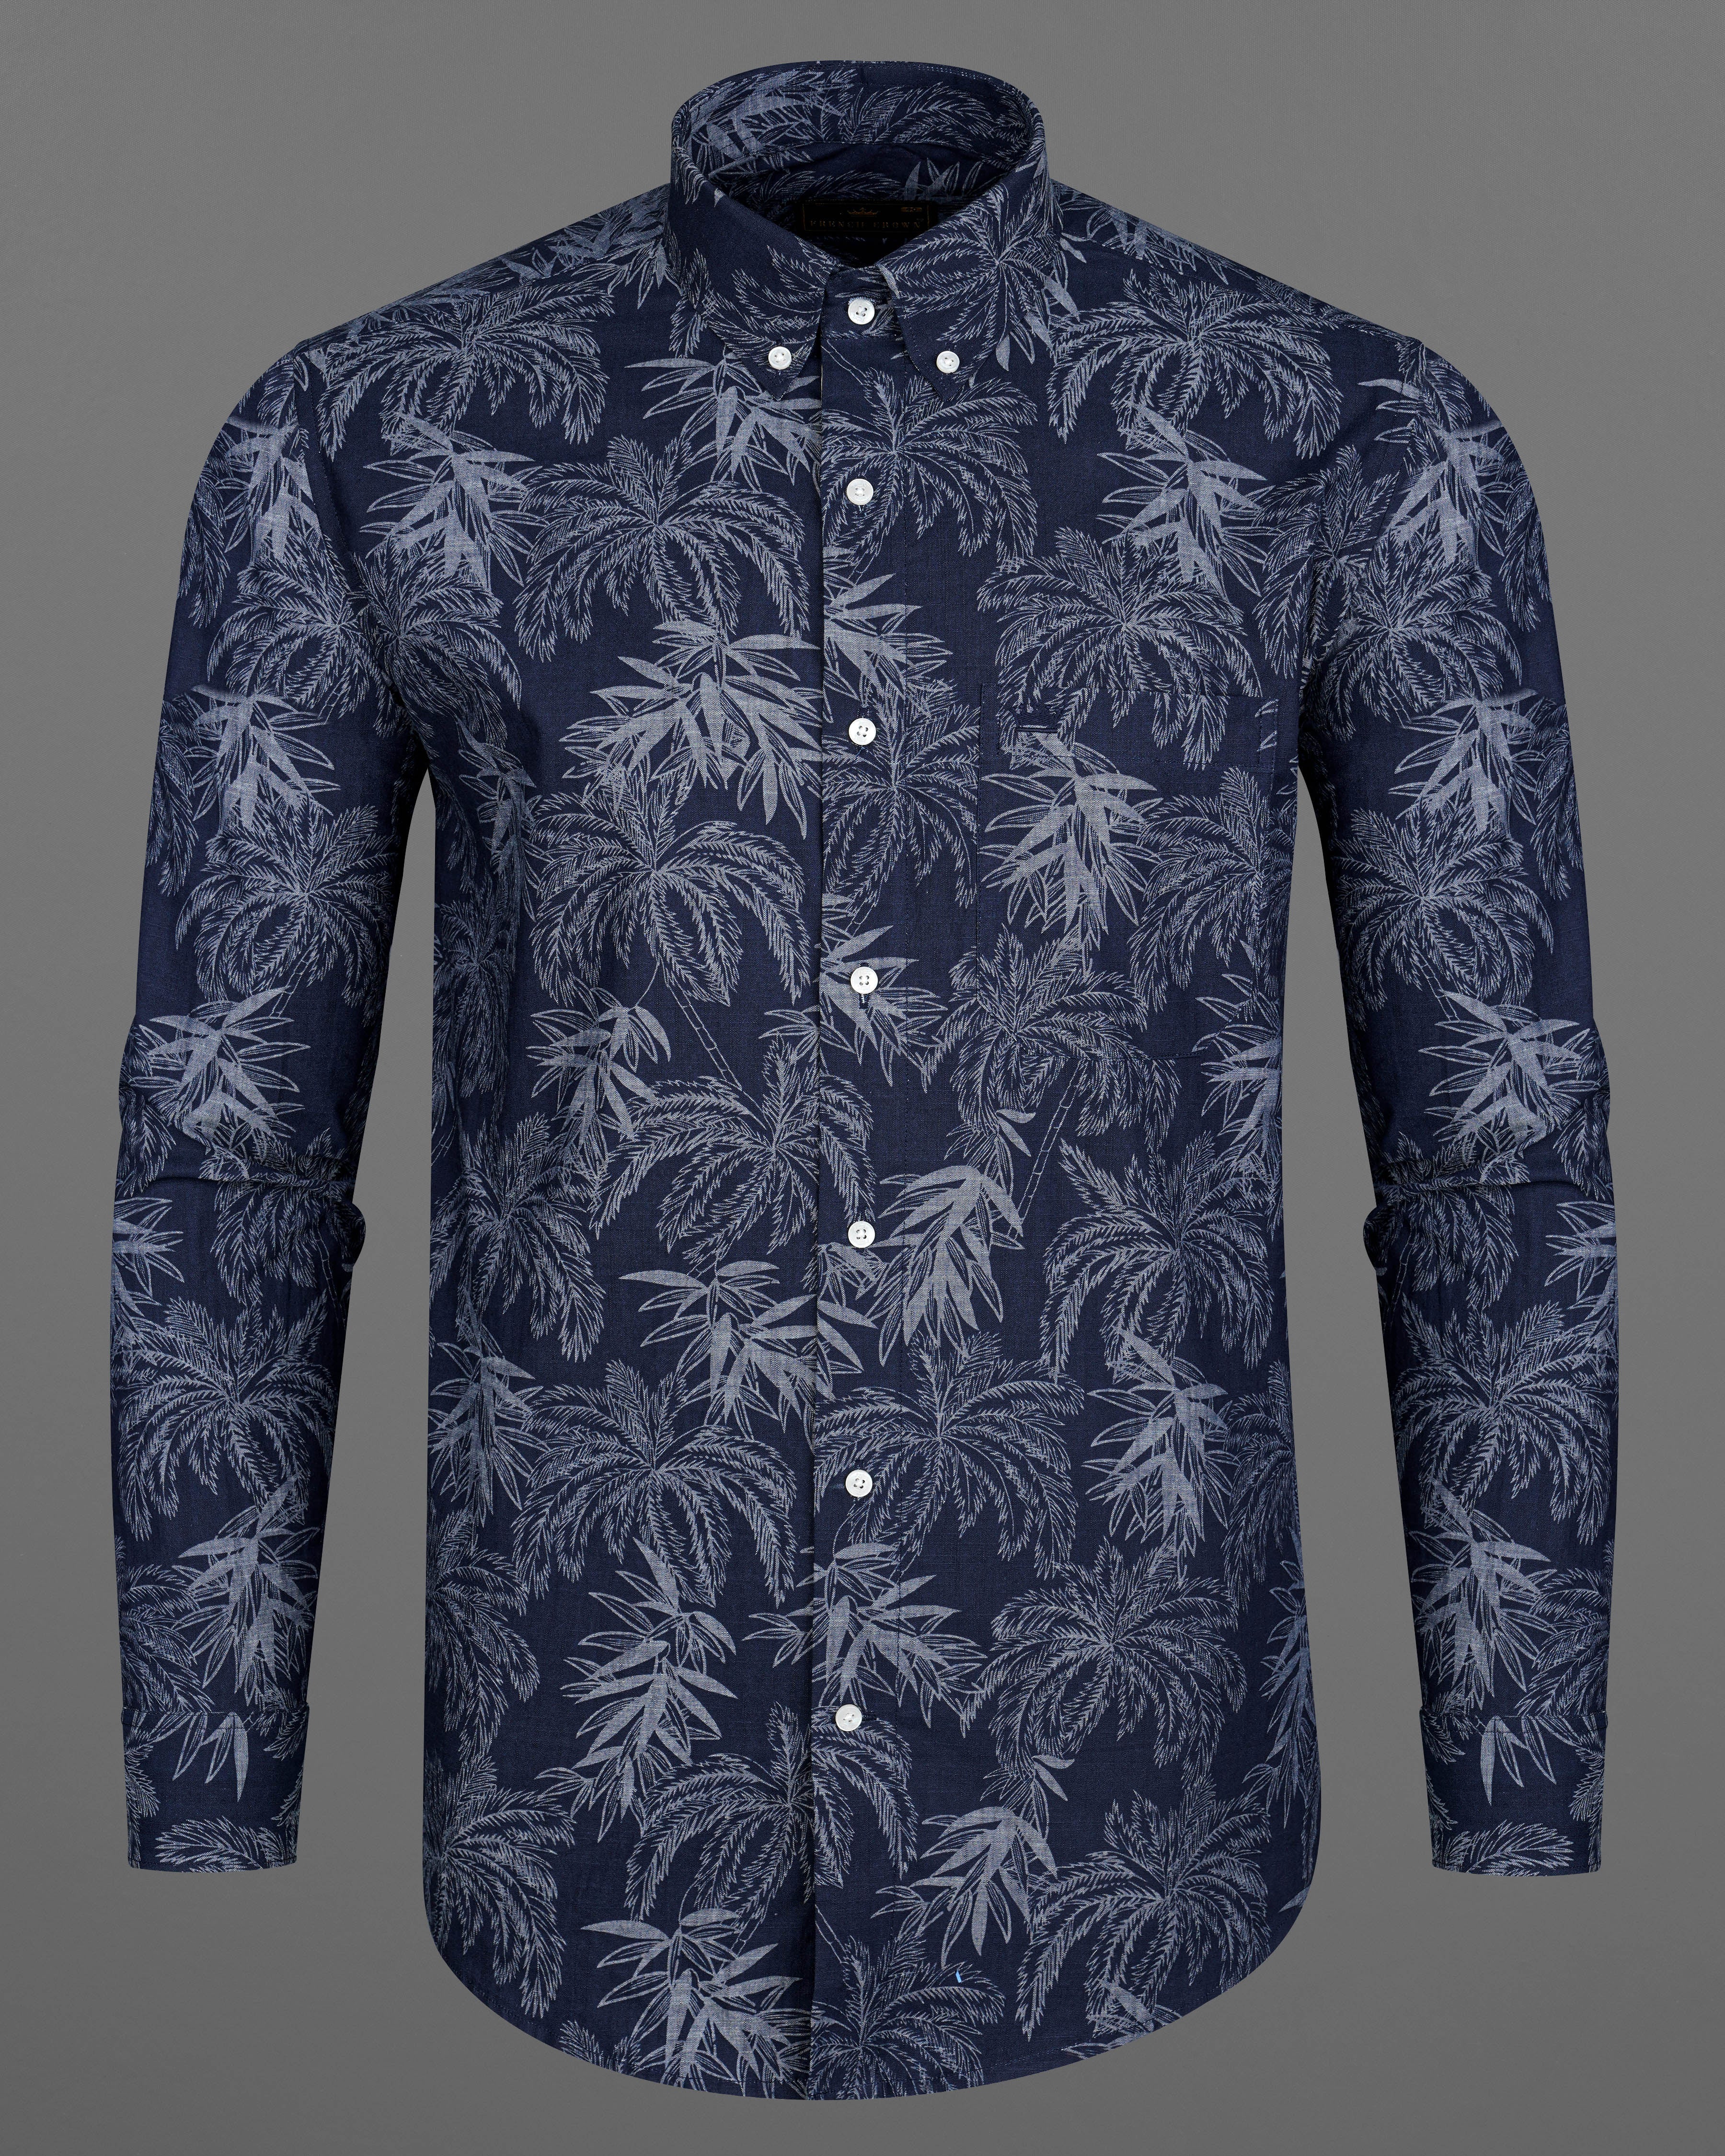 Firefly Blue with Amethyst Gray Leaves Chambray Shirt 8387-BD-38, 8387-BD-H-38, 8387-BD-39,8387-BD-H-39, 8387-BD-40, 8387-BD-H-40, 8387-BD-42, 8387-BD-H-42, 8387-BD-44, 8387-BD-H-44, 8387-BD-46, 8387-BD-H-46, 8387-BD-48, 8387-BD-H-48, 8387-BD-50, 8387-BD-H-50, 8387-BD-52, 8387-BD-H-52